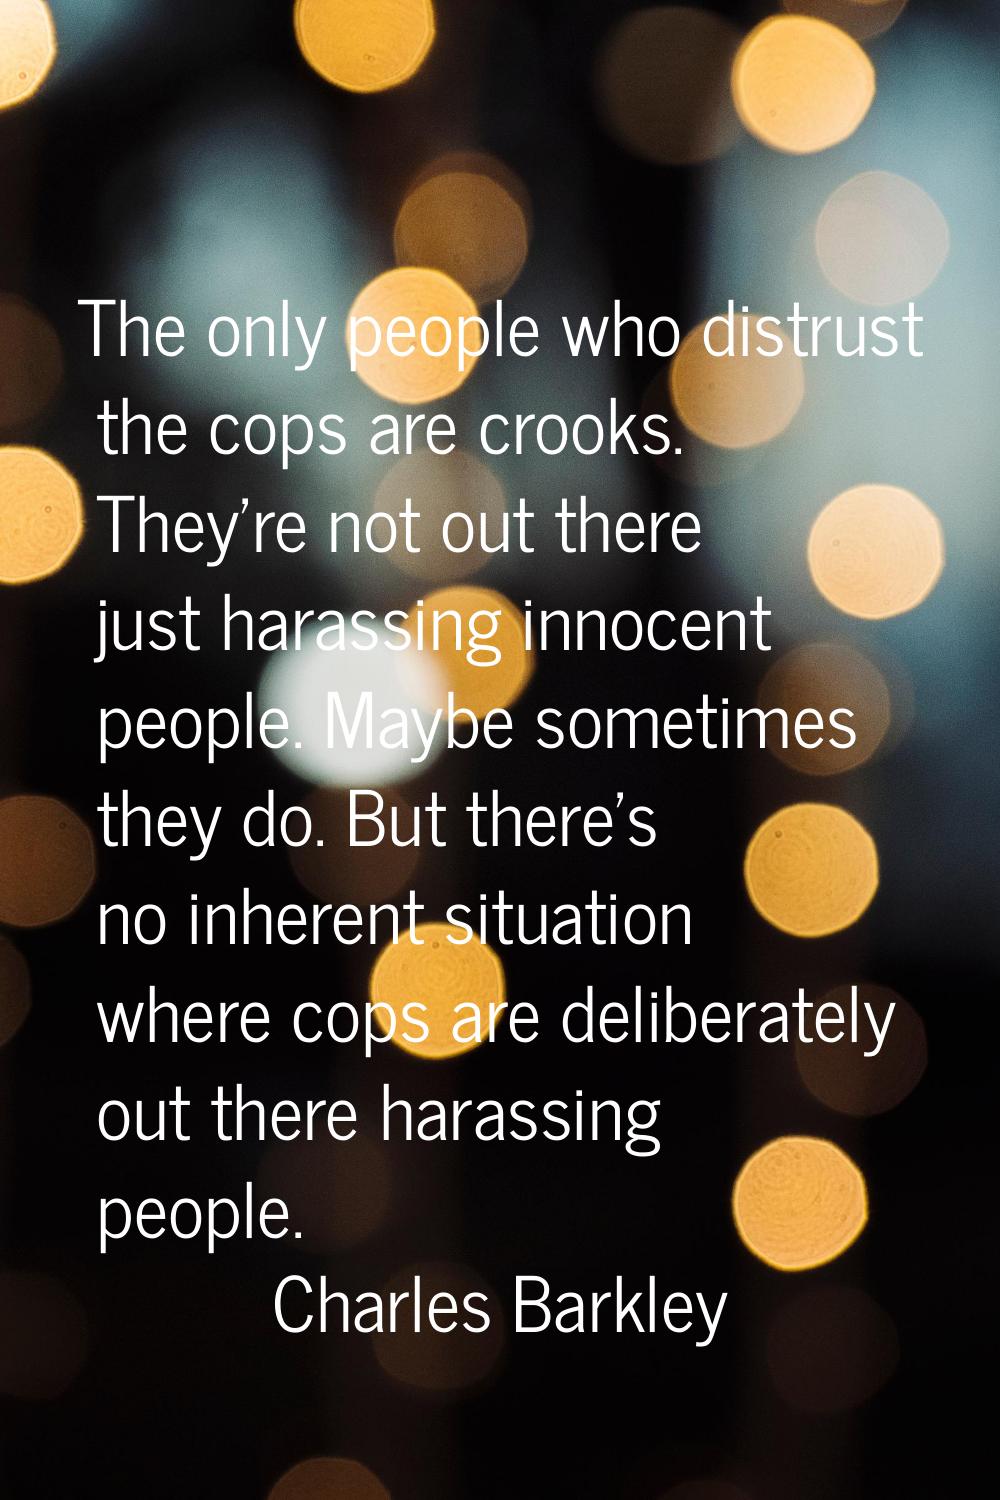 The only people who distrust the cops are crooks. They're not out there just harassing innocent peo